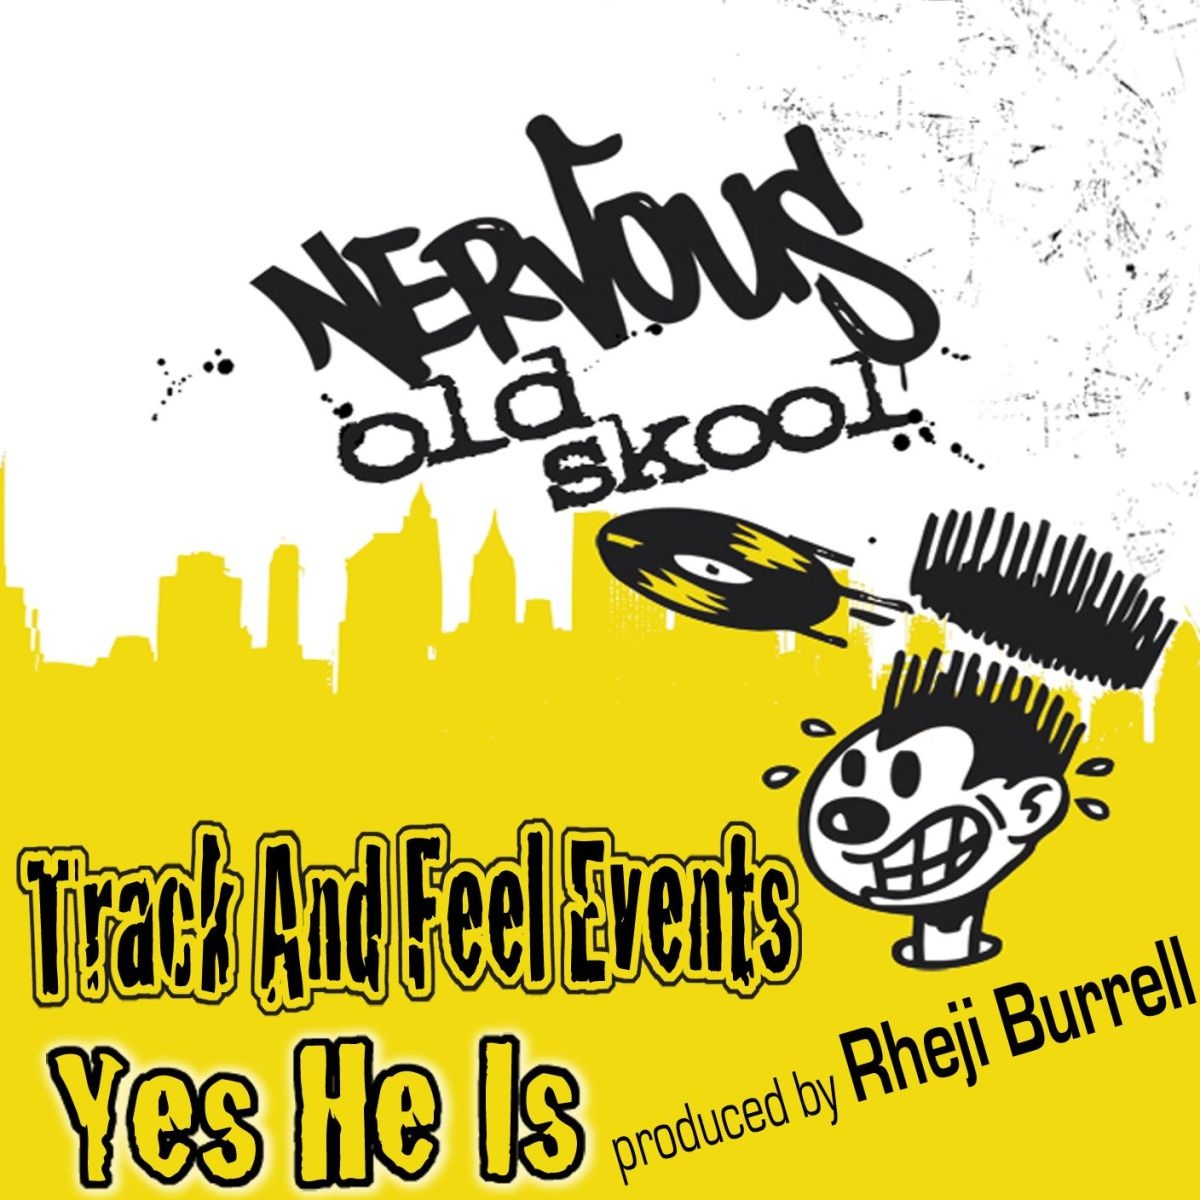 Track And Feel Events - Yes He Is / Nervous Records